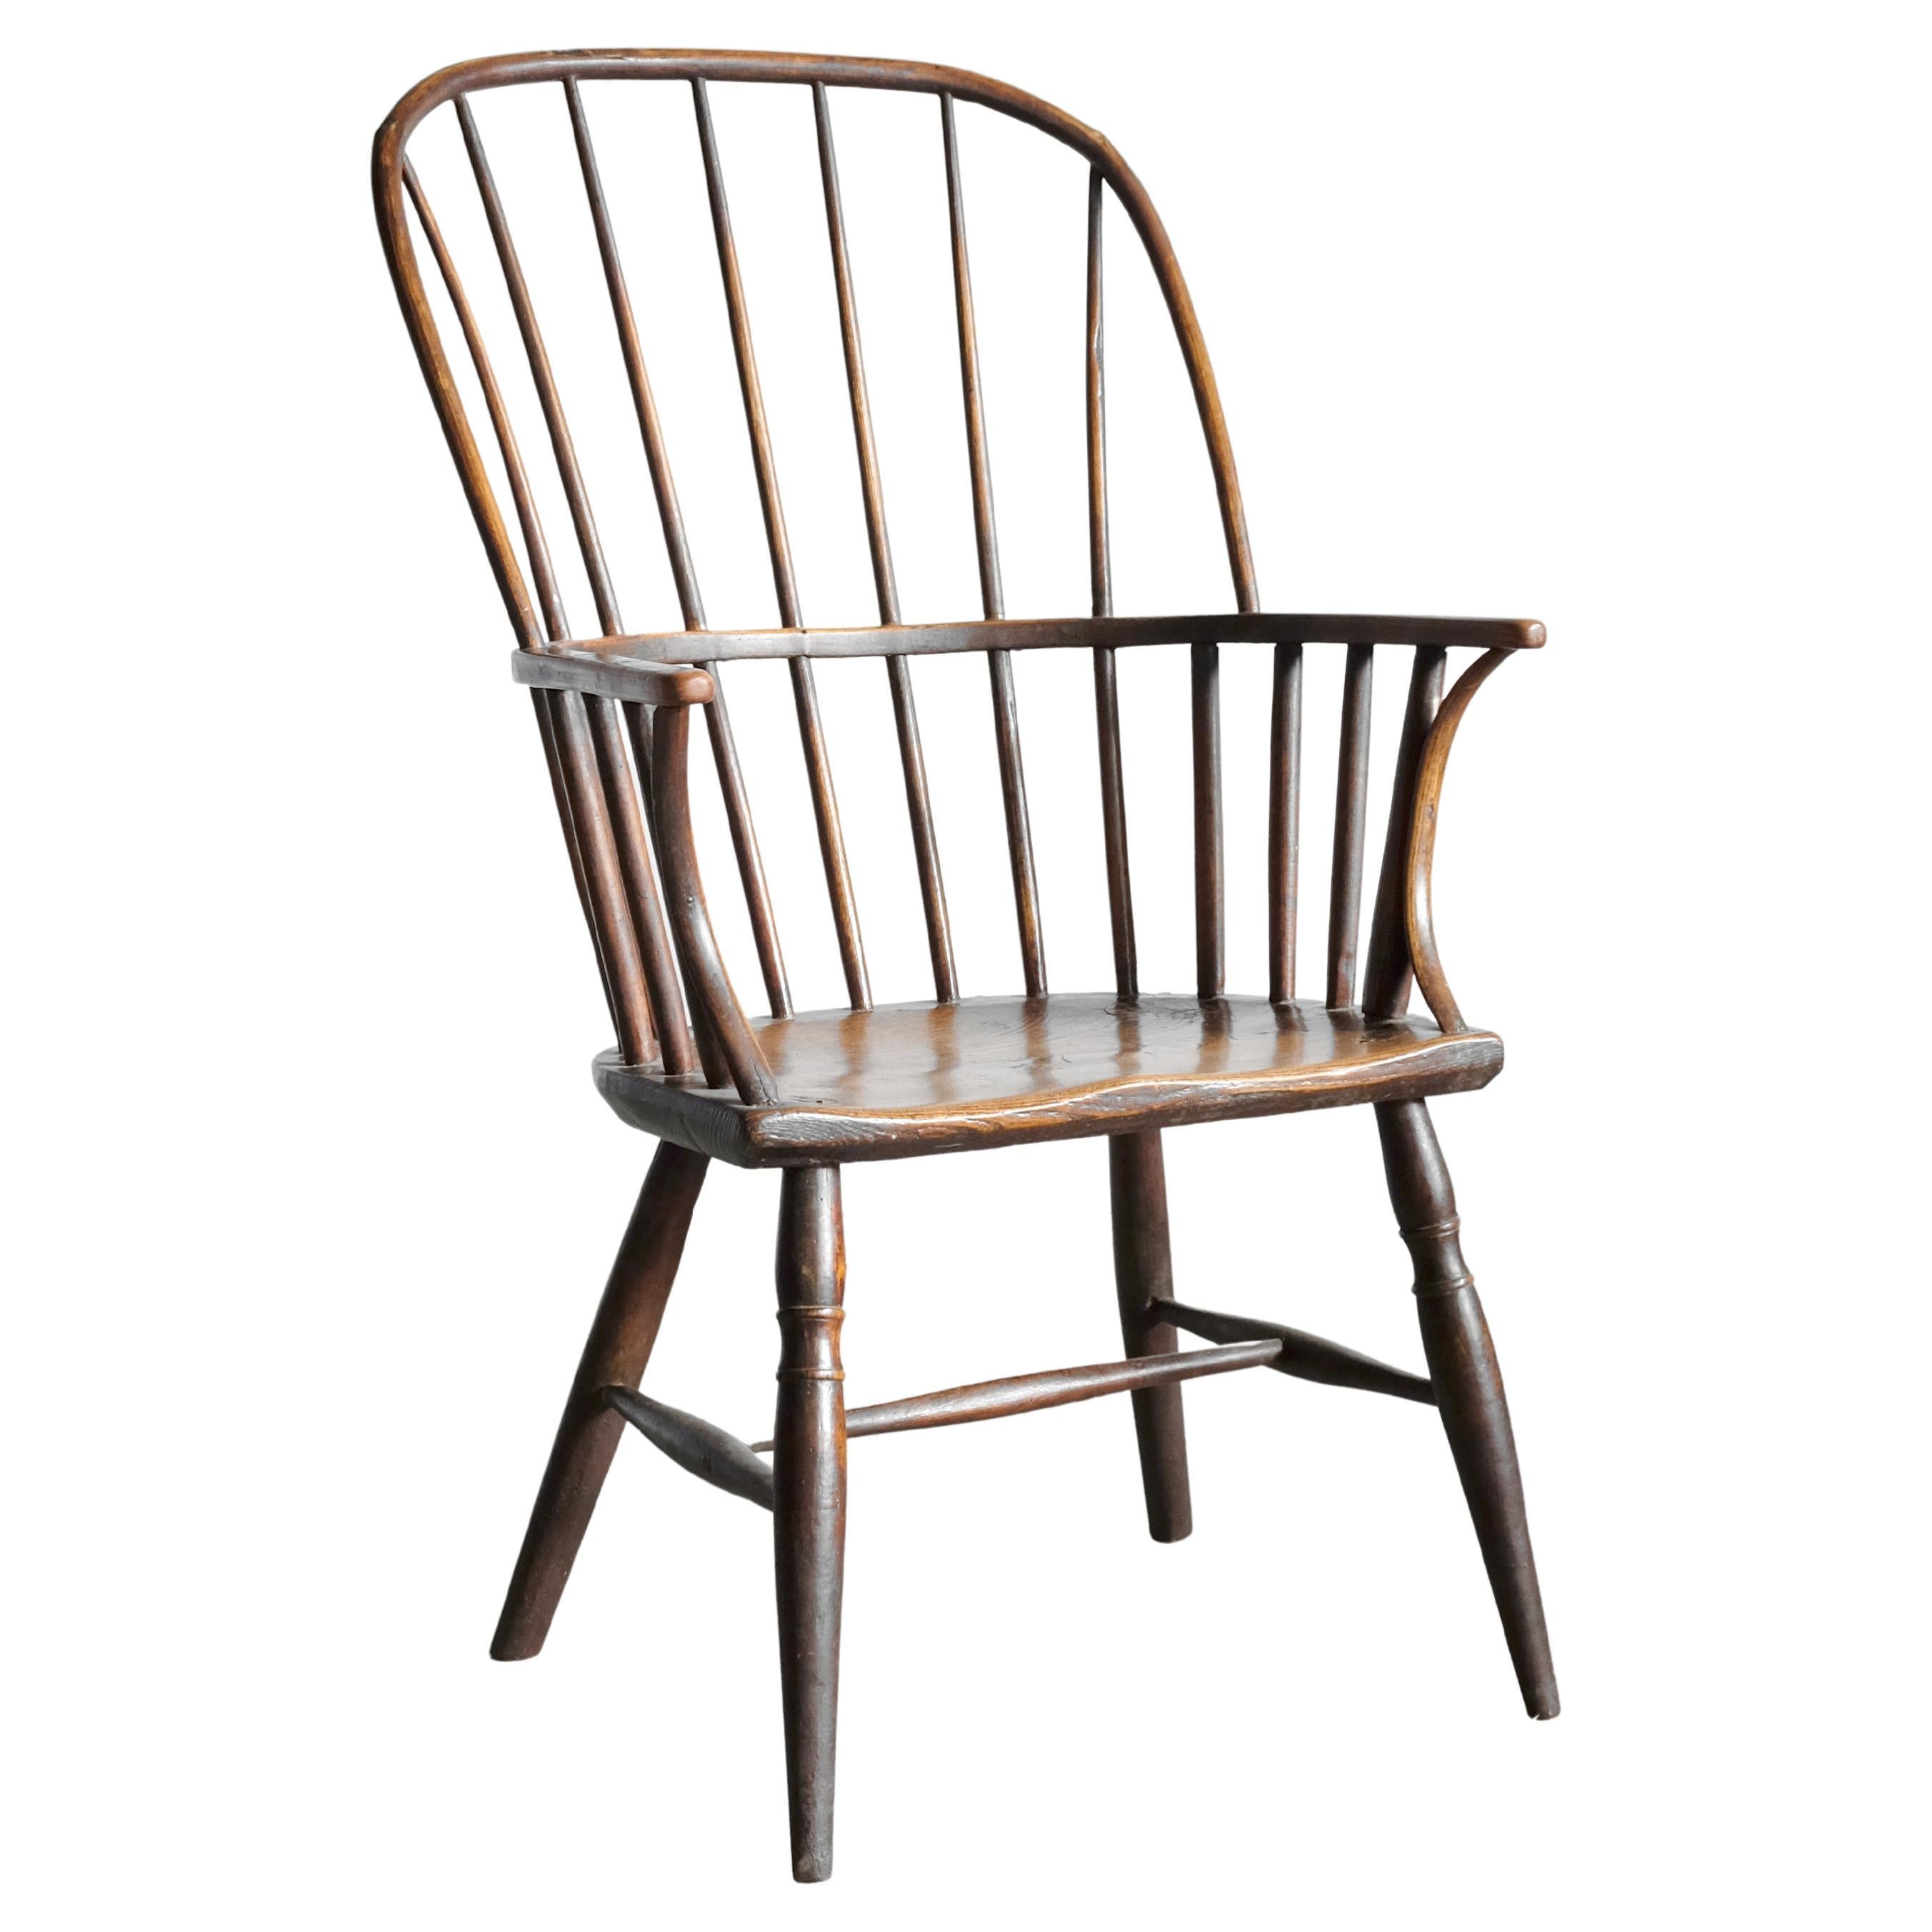 English West Country Windsor Armchair, Stick Chair, 18th Century, Elm, Ash, Pine